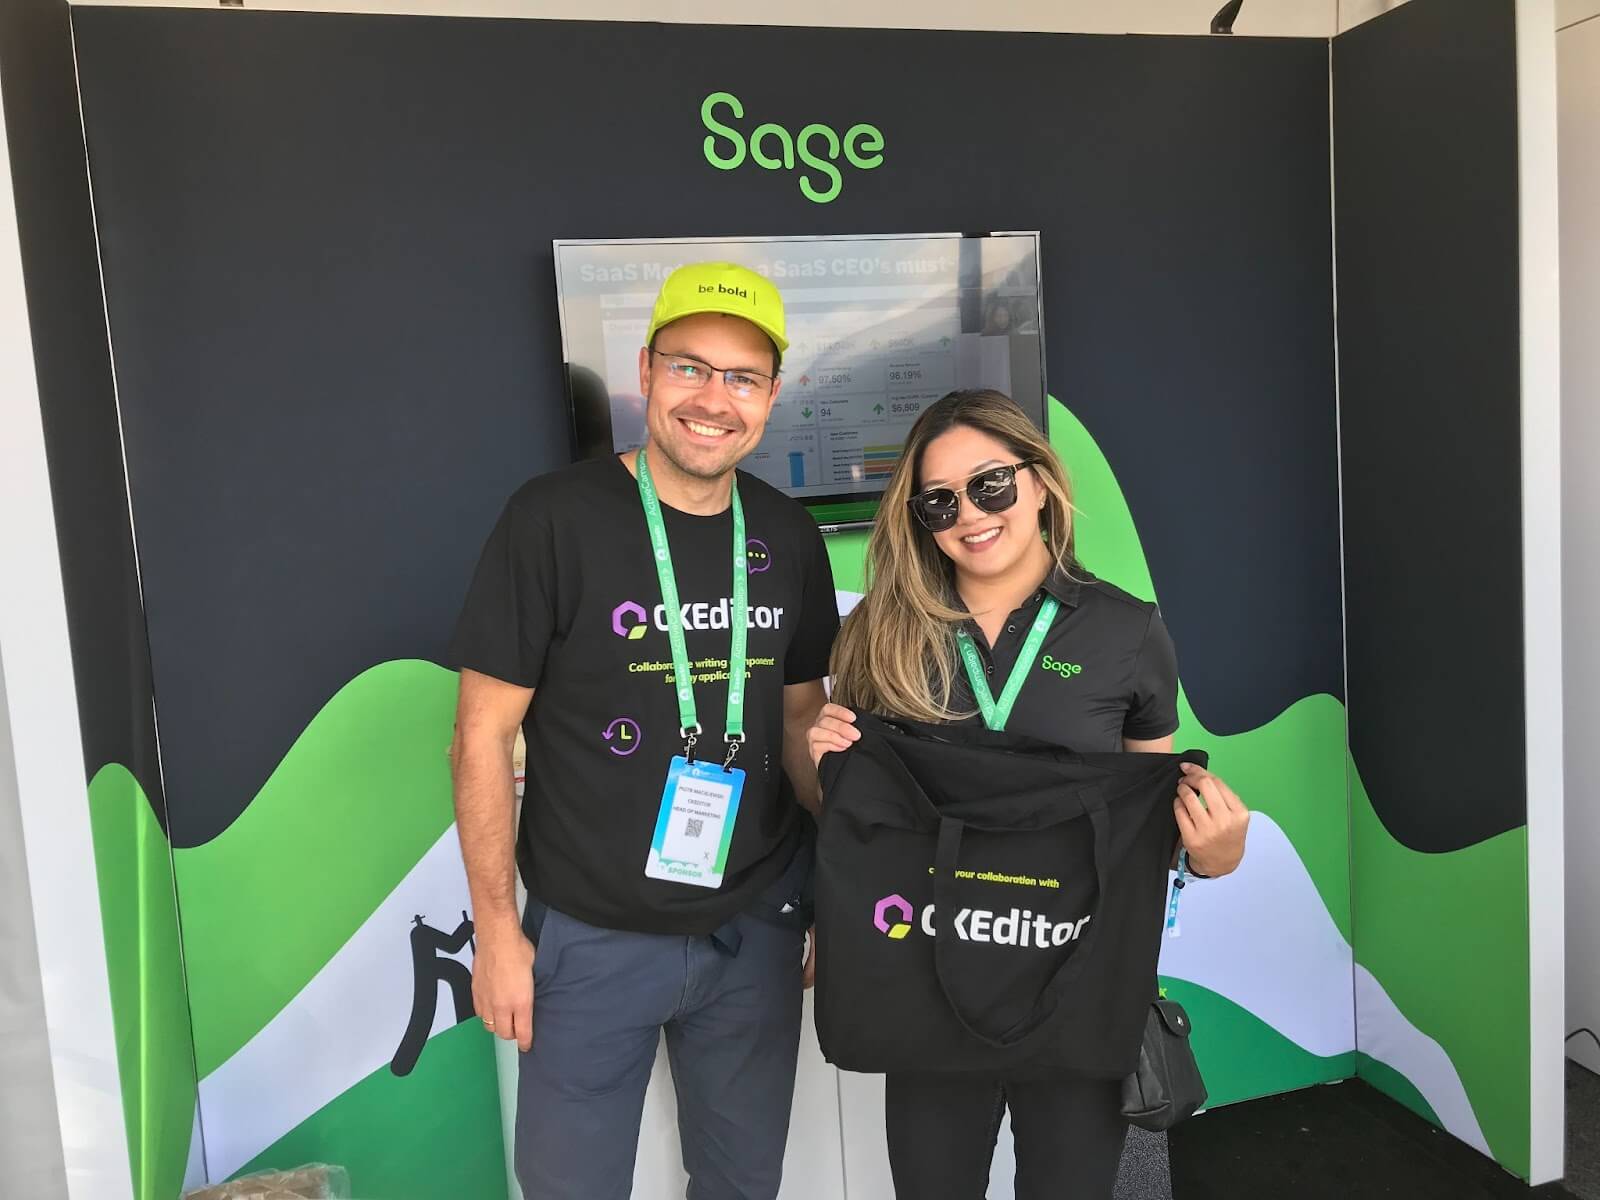 Sage’s team welcomed Piotr at their booth during SaaStr Annual 2022 and was happy to exchange swag.